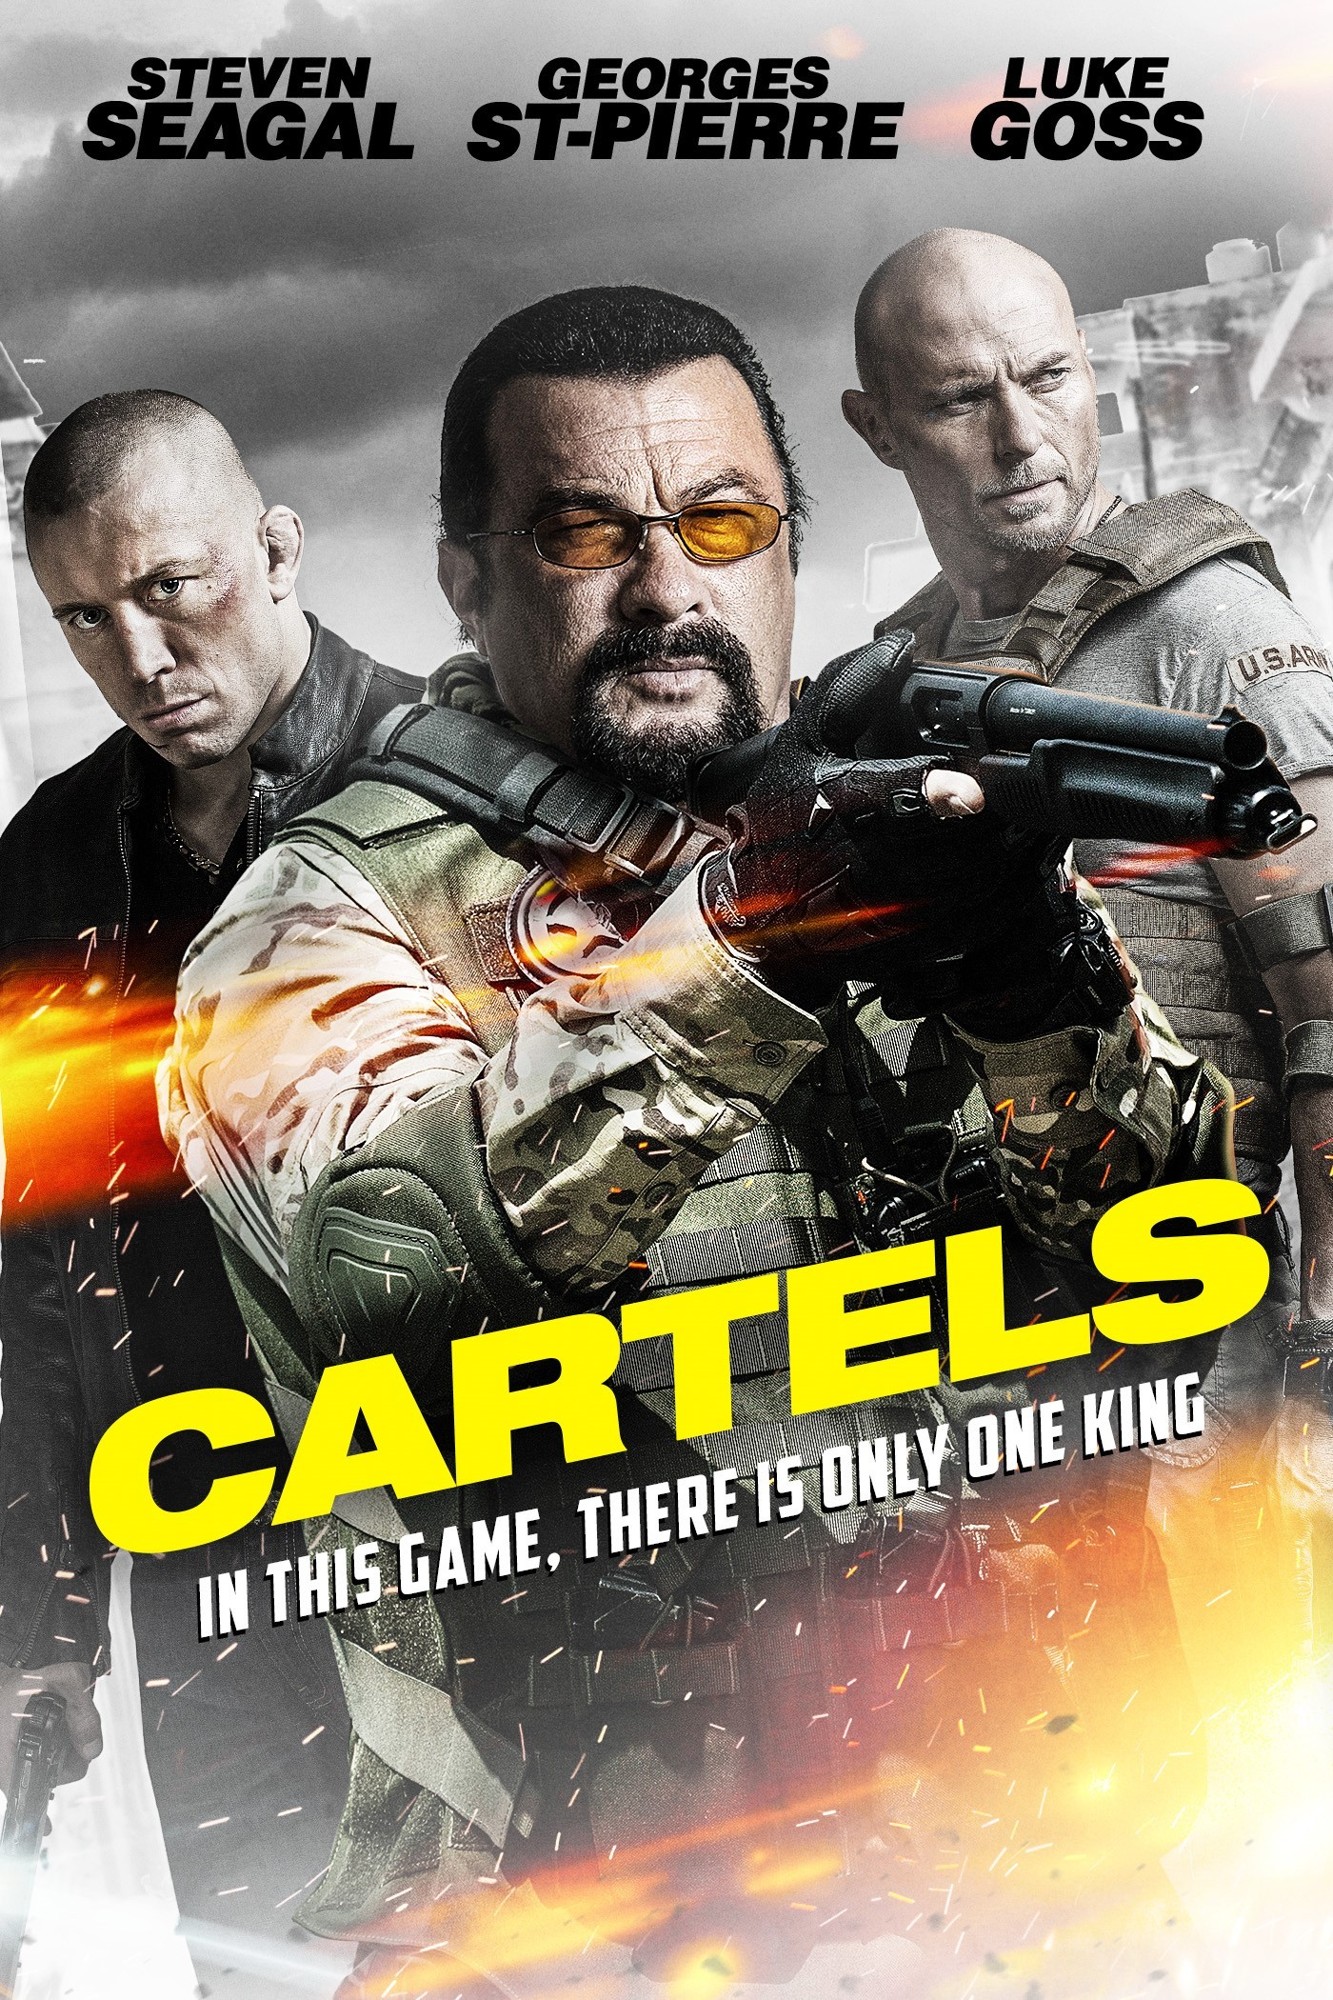 Poster of Grindstone Entertainment's Cartels (2017)